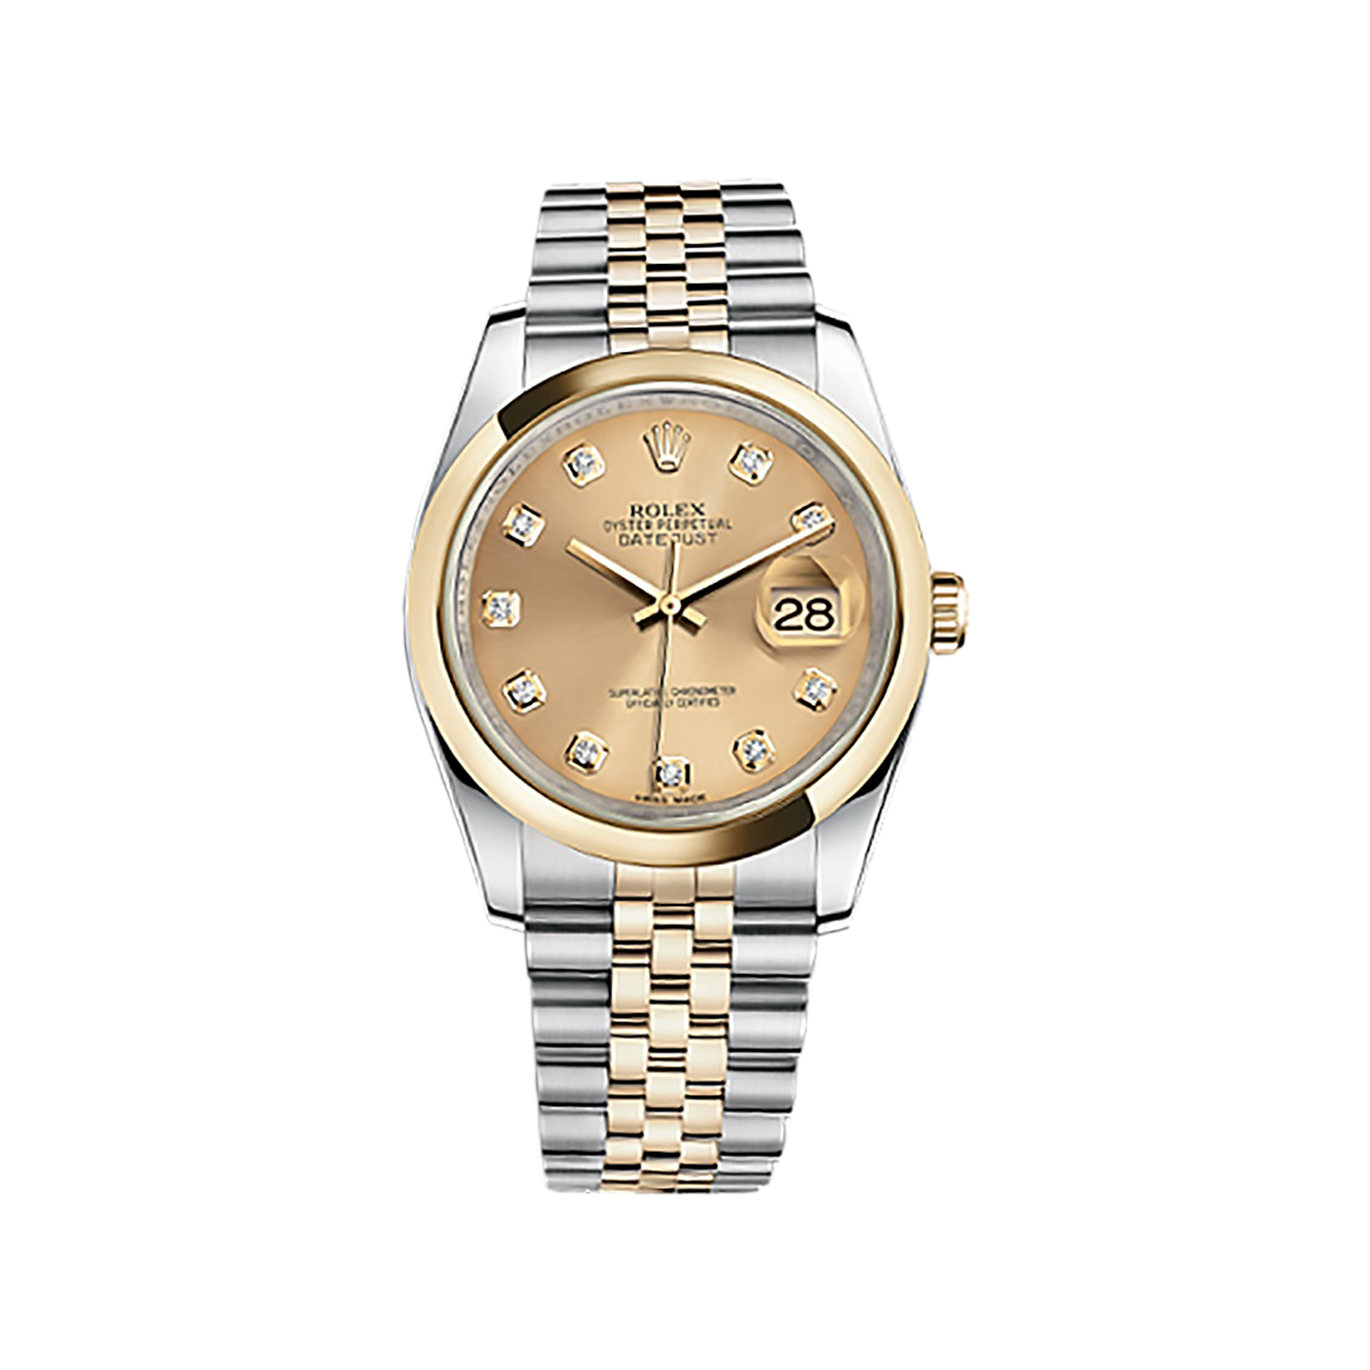 Datejust 36 116203 Gold & Stainless Steel Watch (Champagne Set with Diamonds) - Click Image to Close